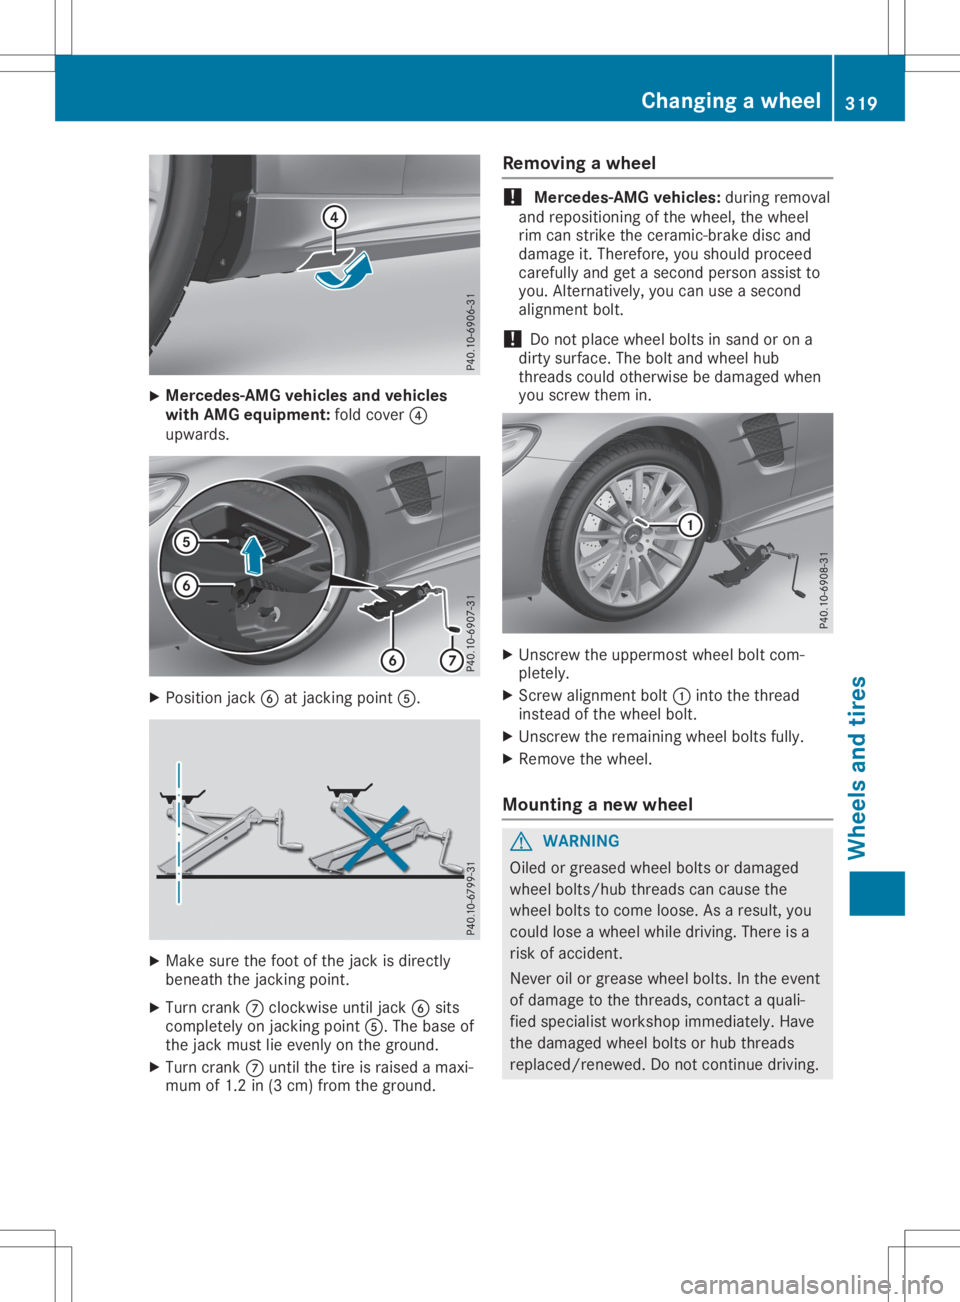 MERCEDES-BENZ SL CLASS 2020  Owners Manual X
Merce
des-AMGvehic lesand vehic les
with AMG equipment: foldcover 0085
upw ards. X
Posi tion jack 0084atjacking point0083. X
Make surethefoot ofthe jack isdirectly
benea ththe jacking point.
X Turn 